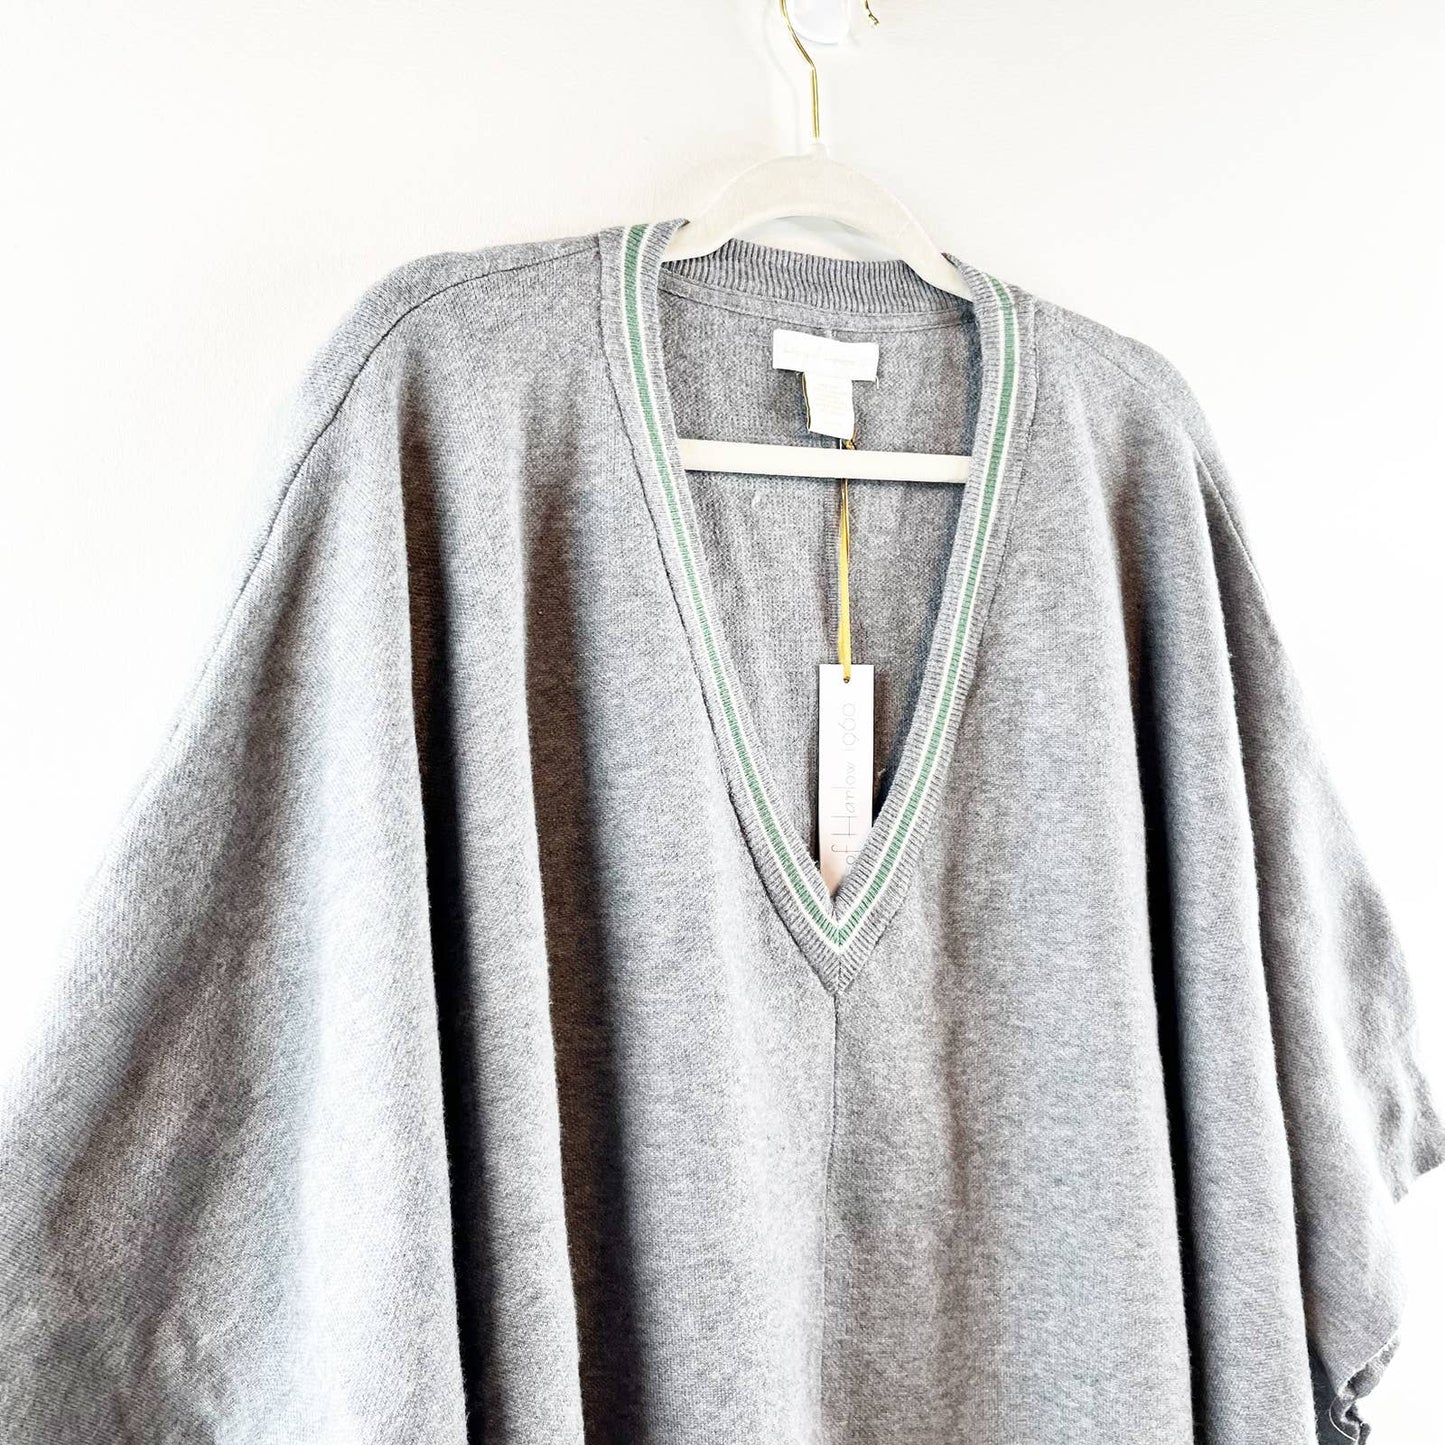 House Of Harlow 1960 Poncho Oversized V-Neck Sweater Pullover in Gray One Size